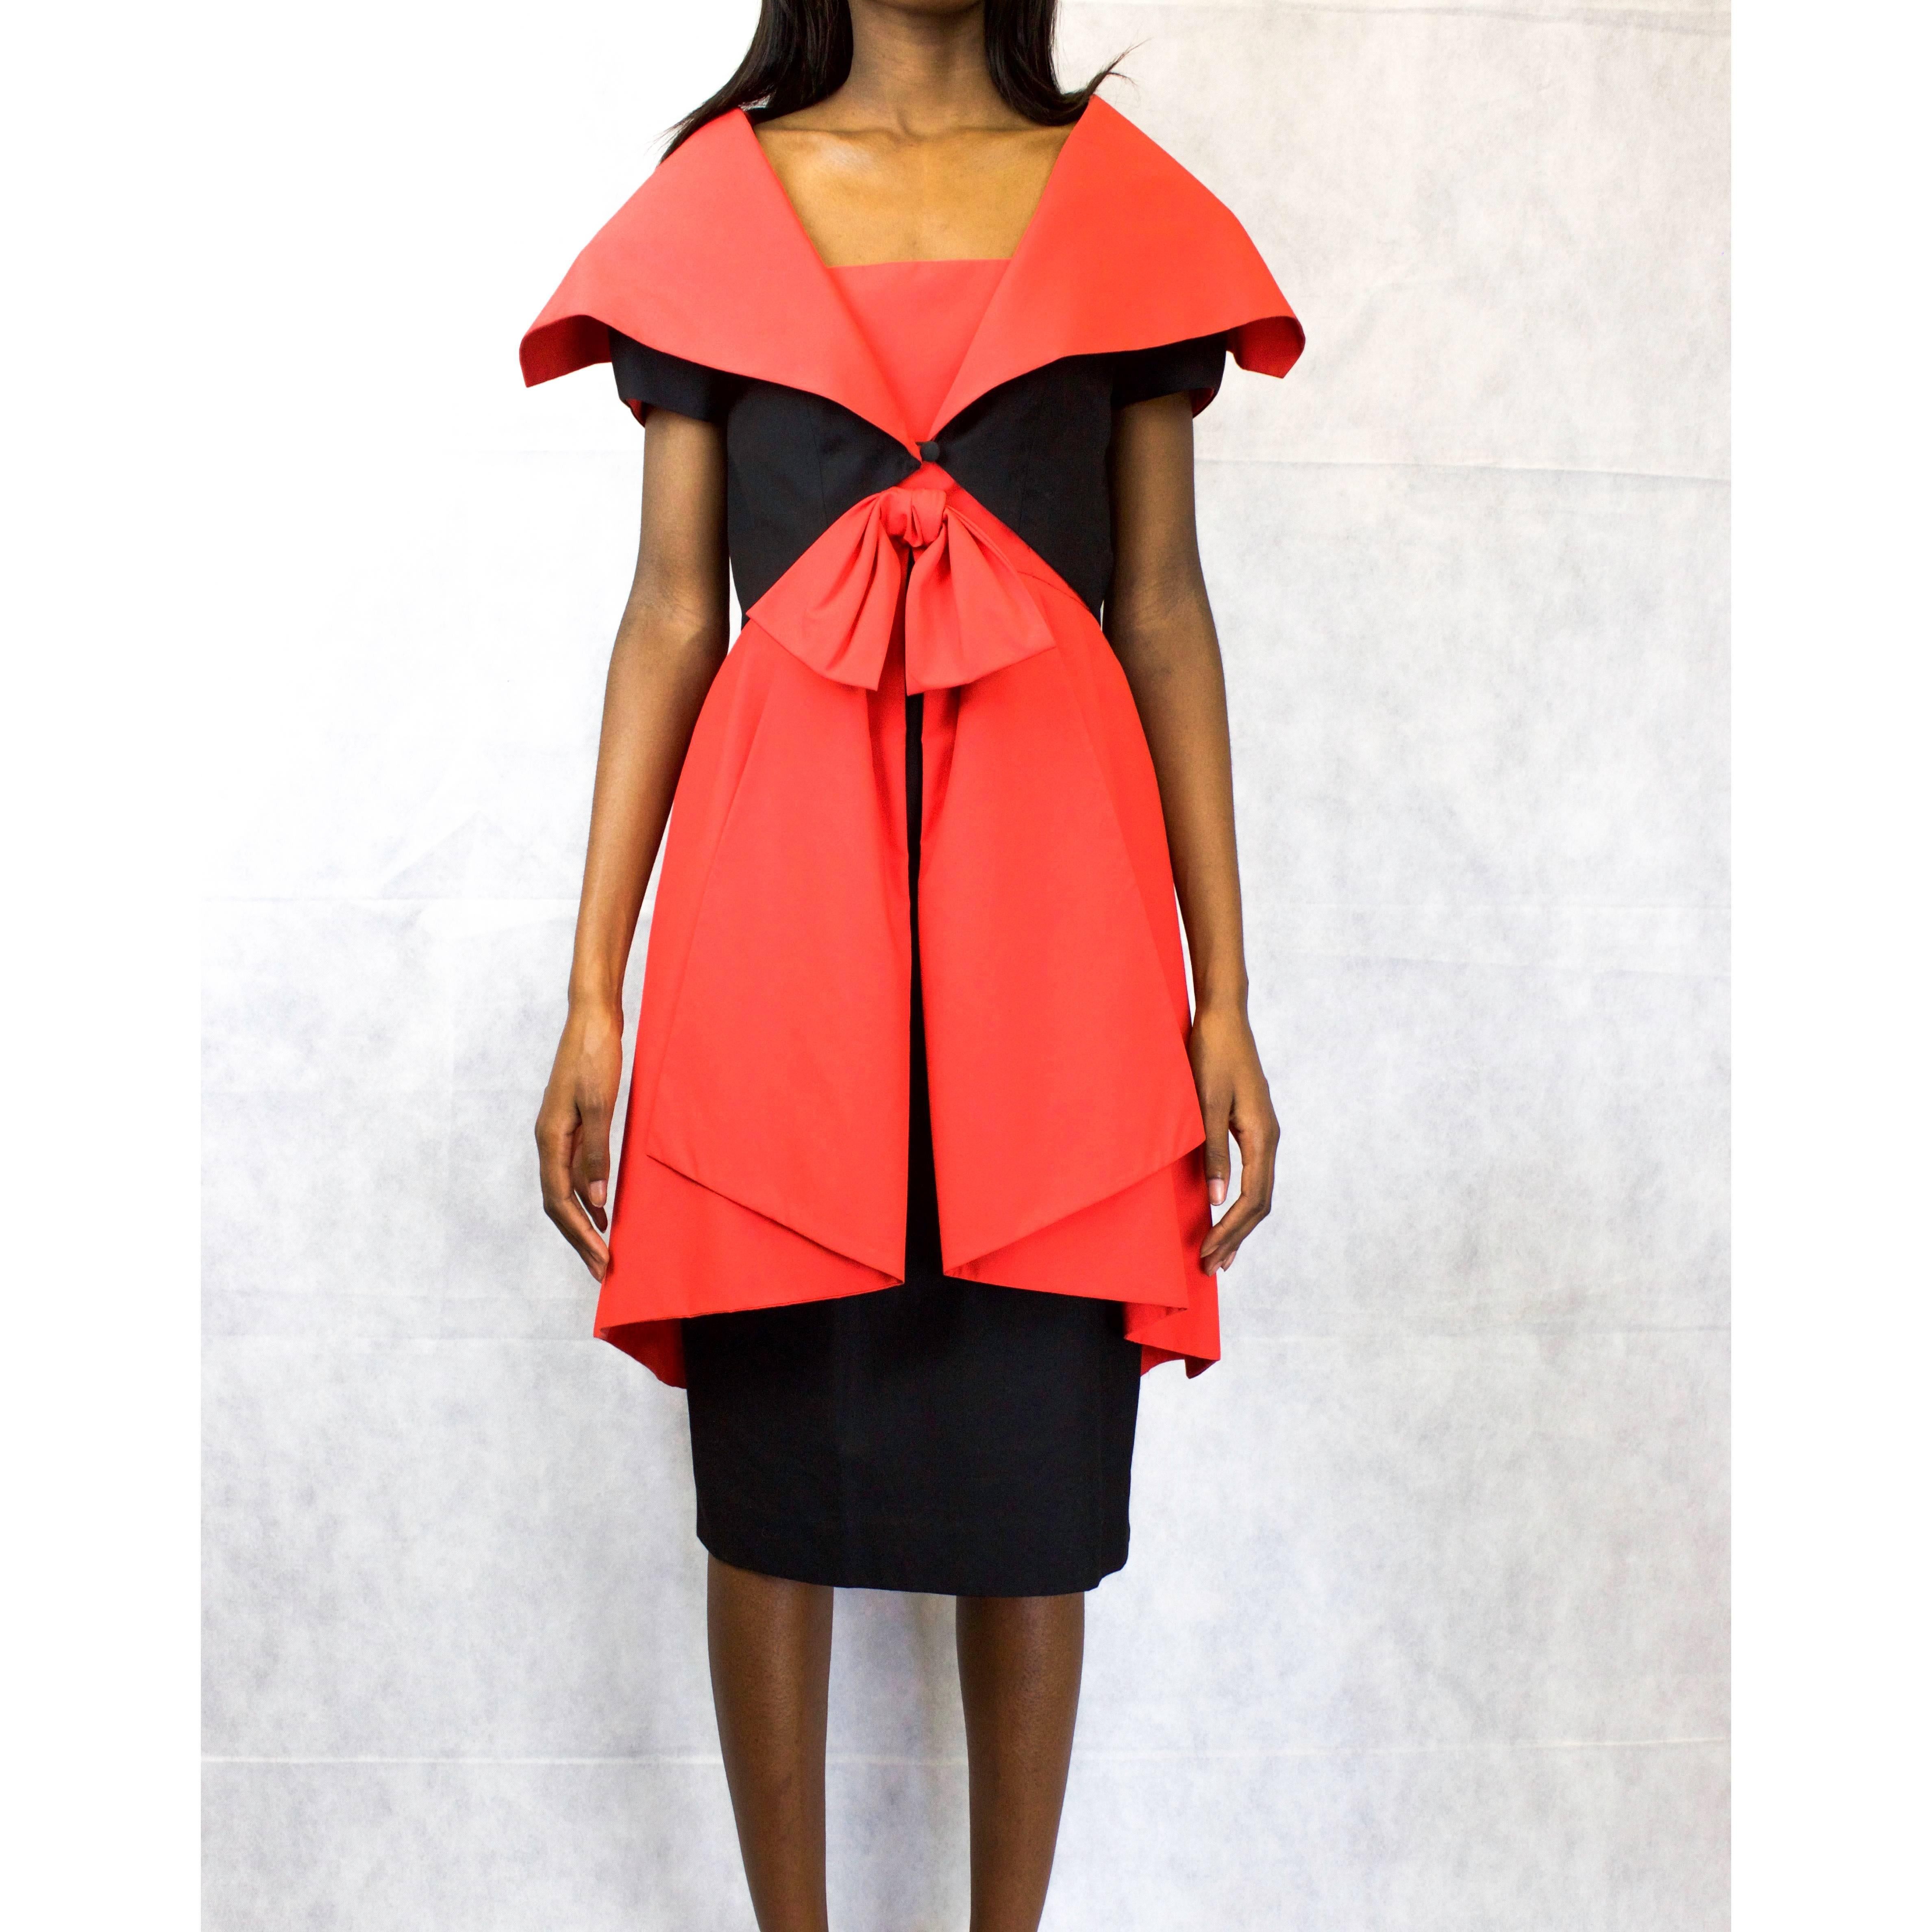 A beautiful and delicately constructed ensemble made from bi-color cotton. The dress features a fitted bodice with fine straps and adorned with a bow under the bustline. This black slim fitted dress is folded within a flared orange origami style